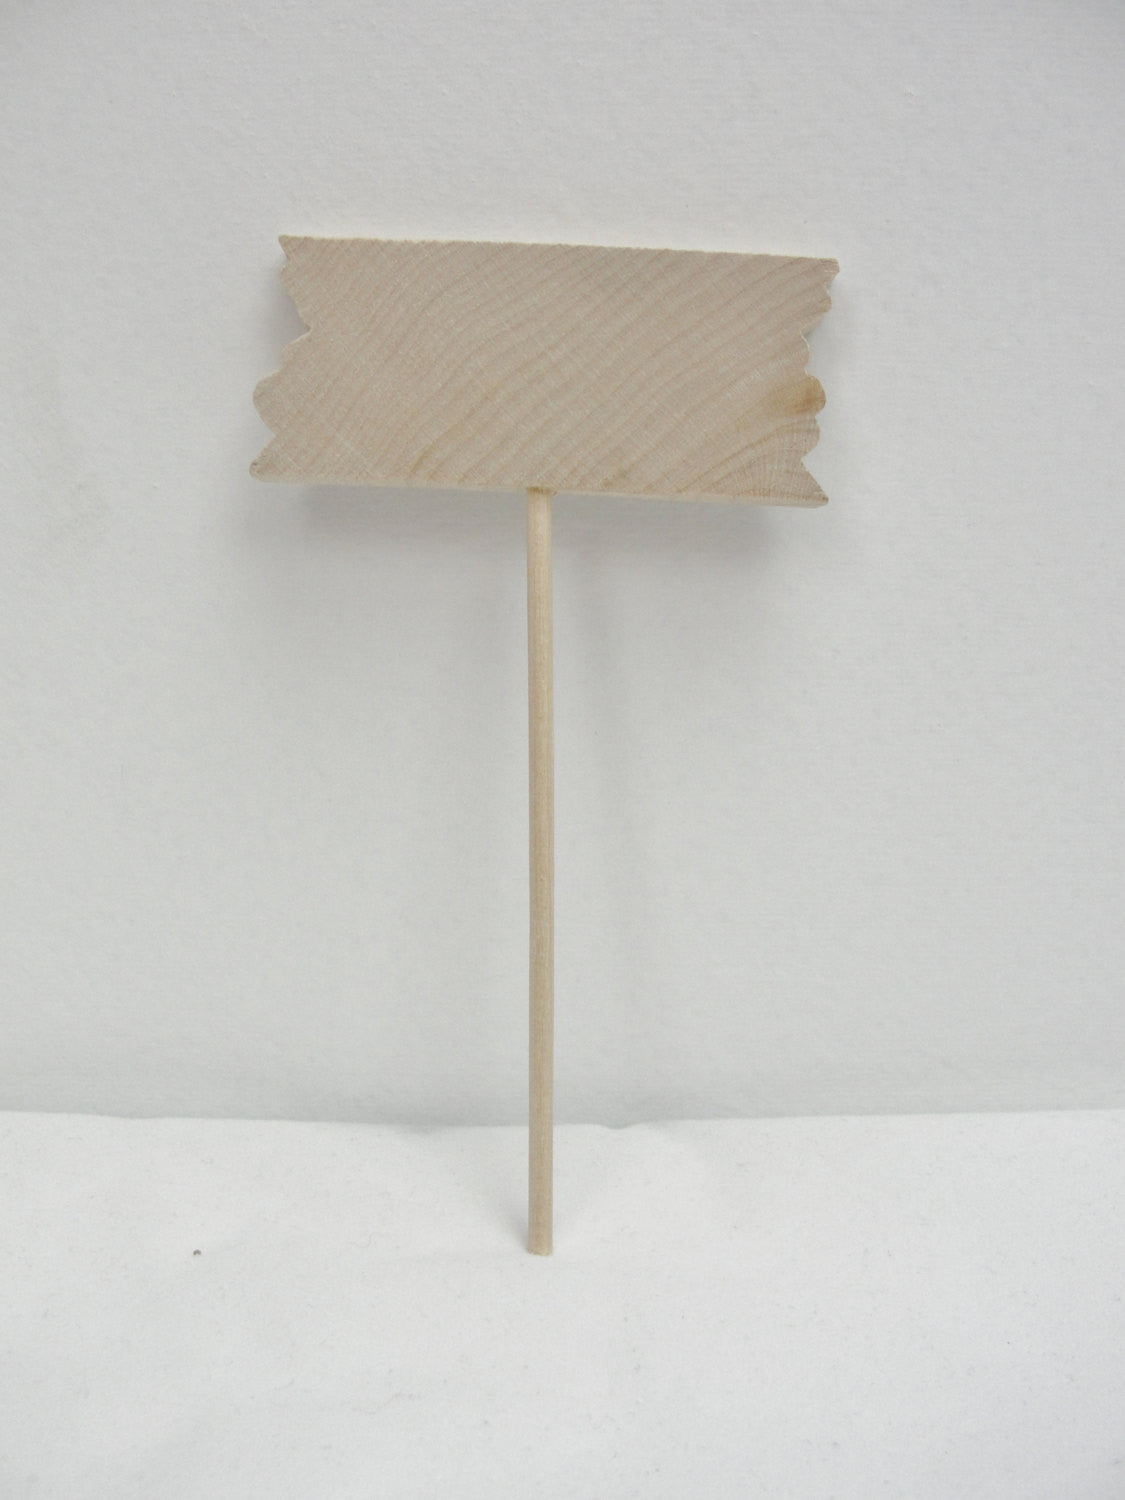 Small wooden sign plant stake set of 5 - Wood parts - Craft Supply House